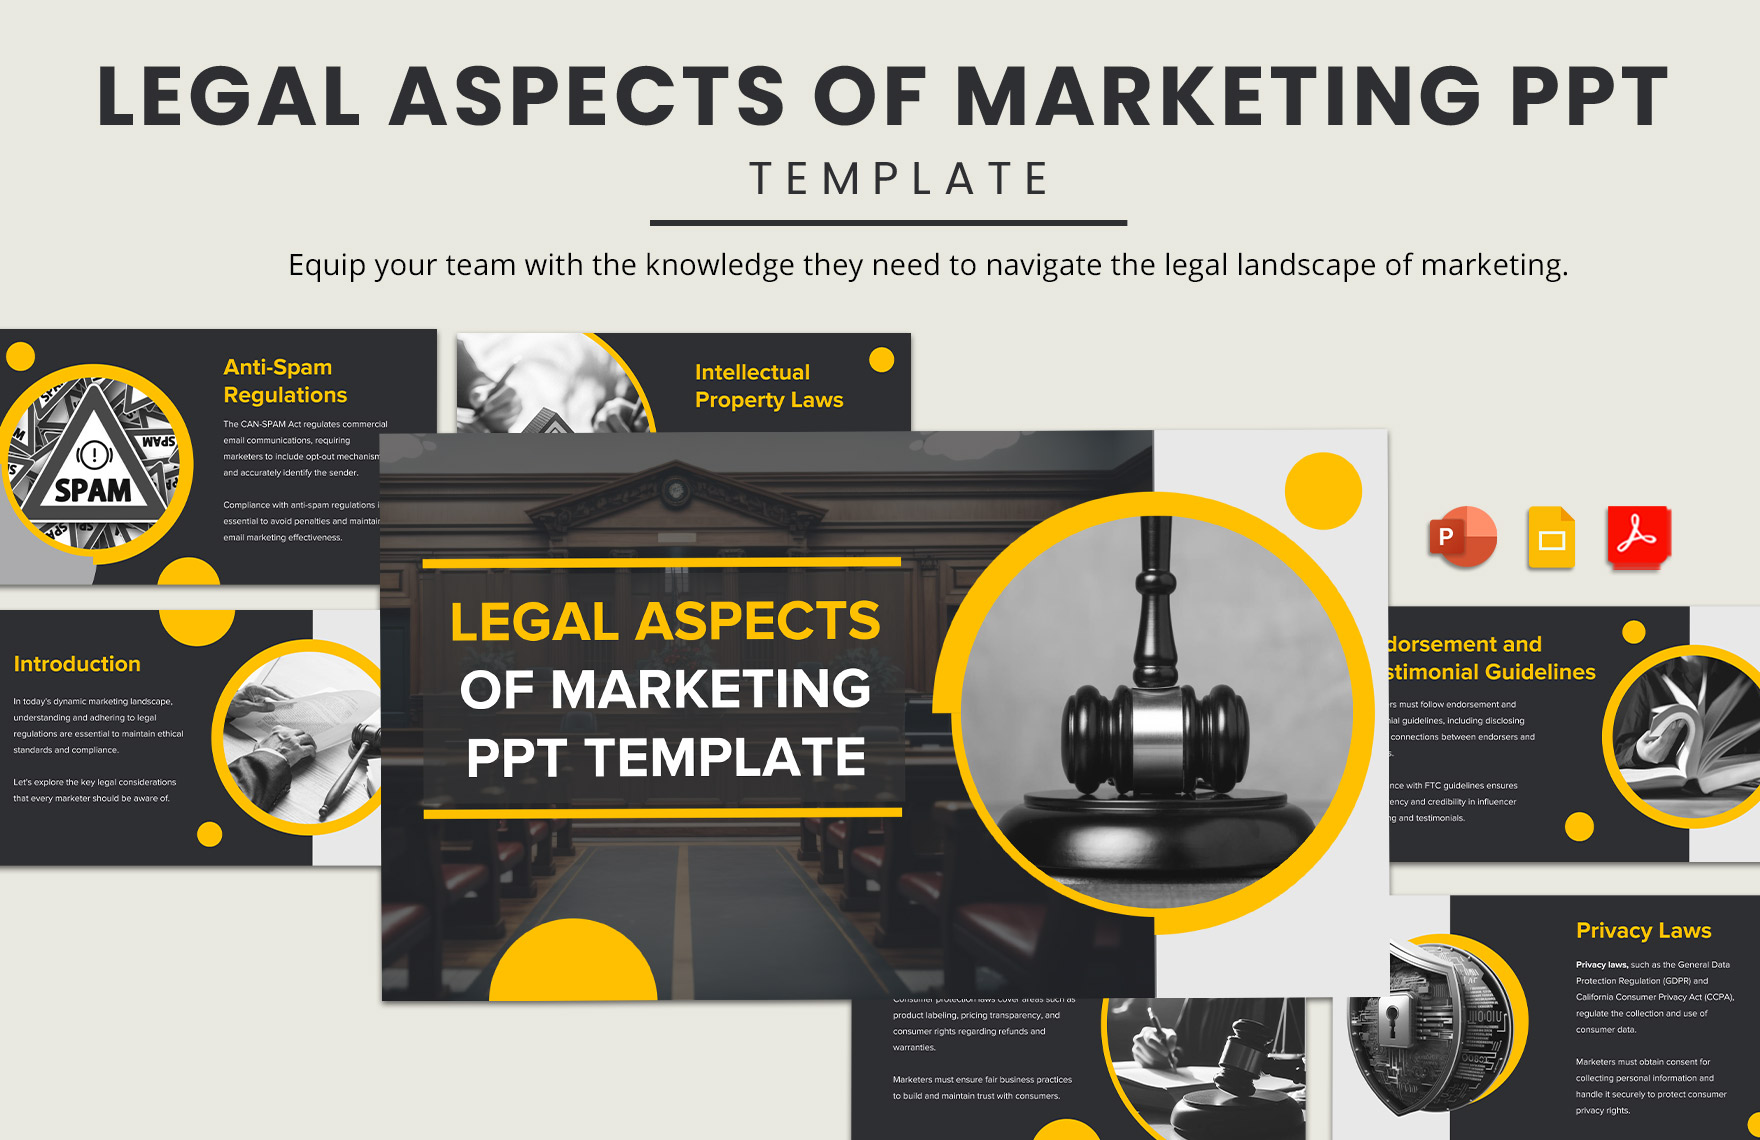 Legal Aspects of Marketing PPT Template